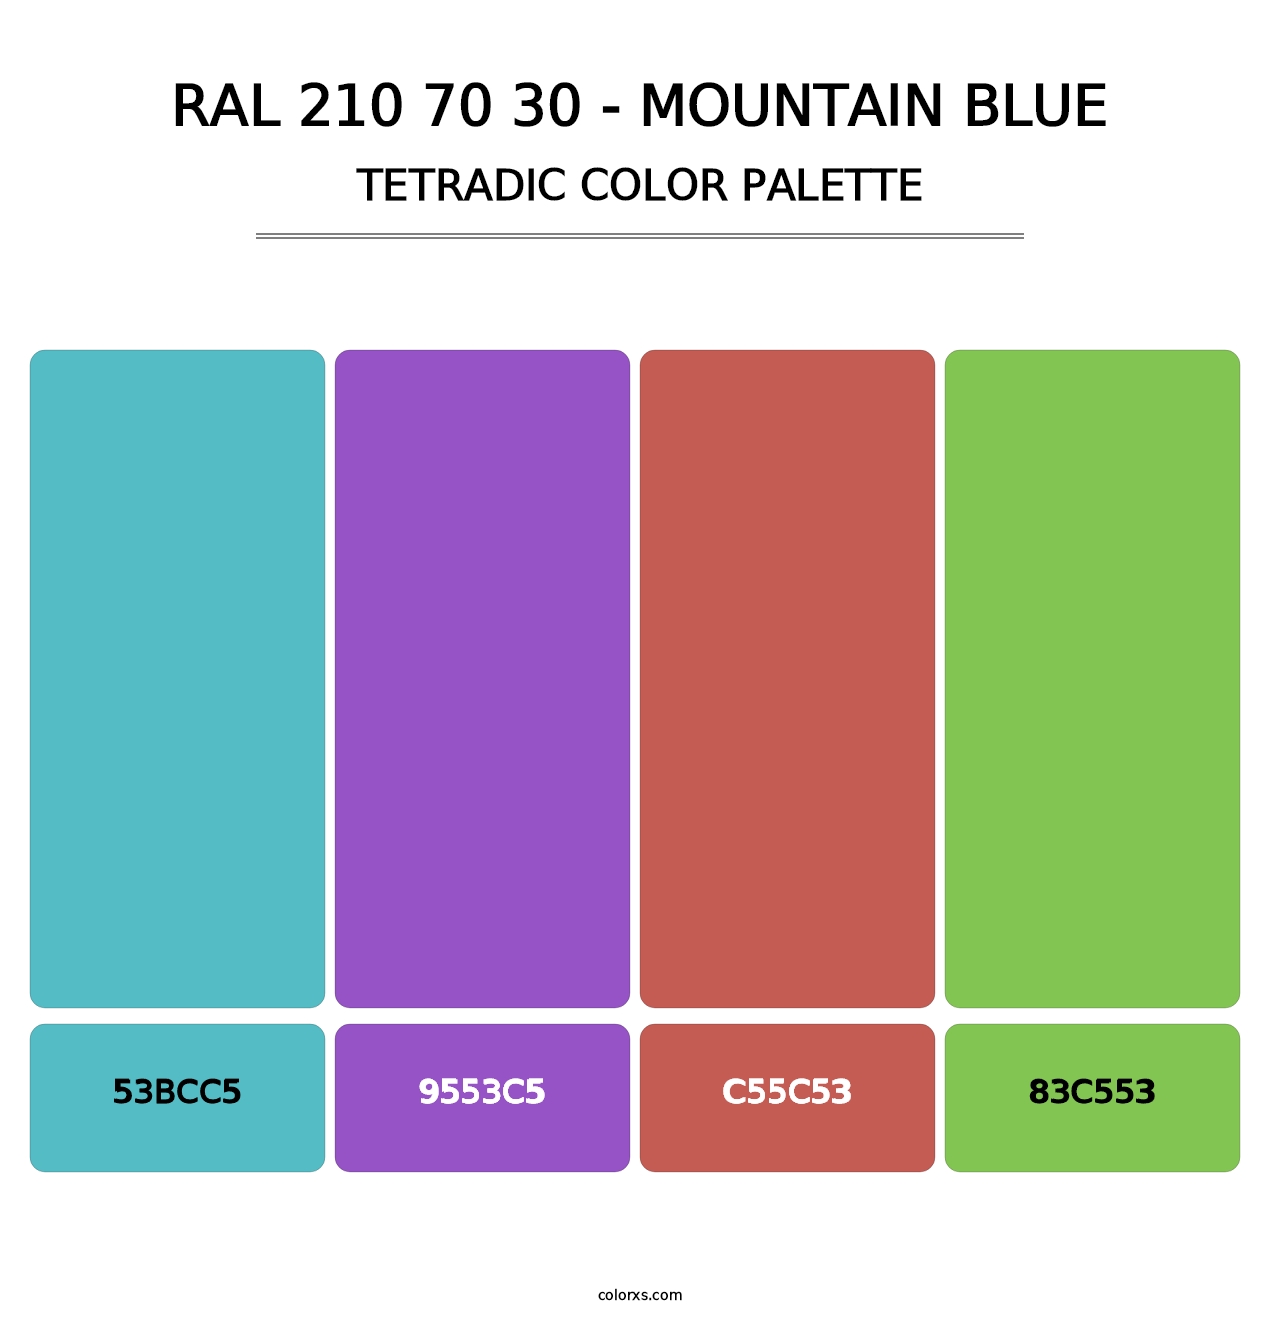 RAL 210 70 30 - Mountain Blue - Tetradic Color Palette